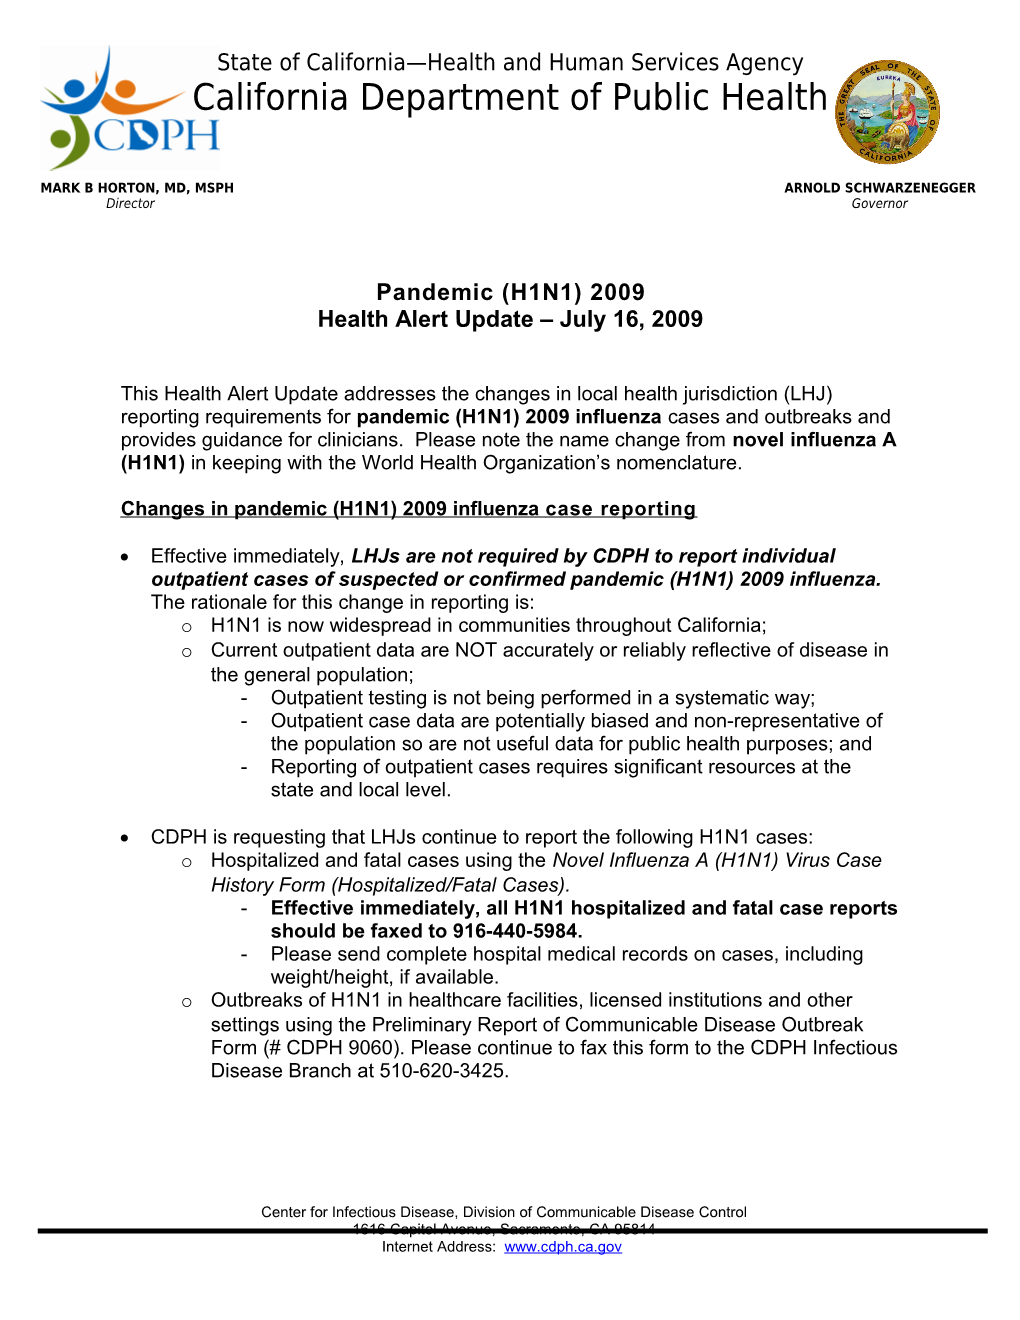 Changes in Pandemic (H1N1) 2009 Influenza Case Reporting